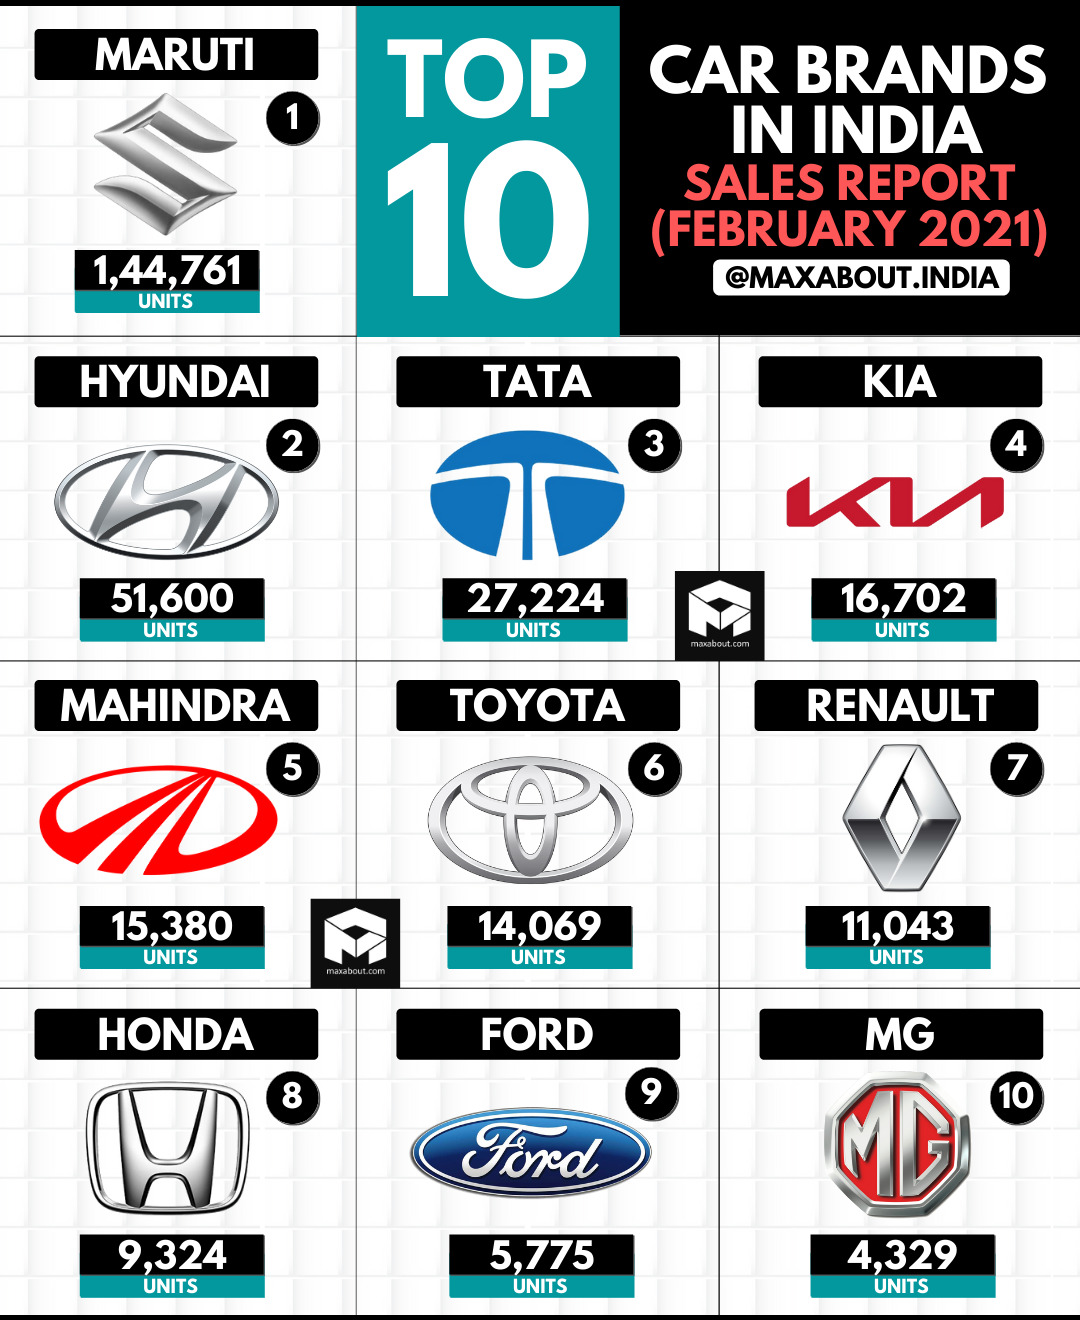 Top 10 Cars Brands in India (February 2021)